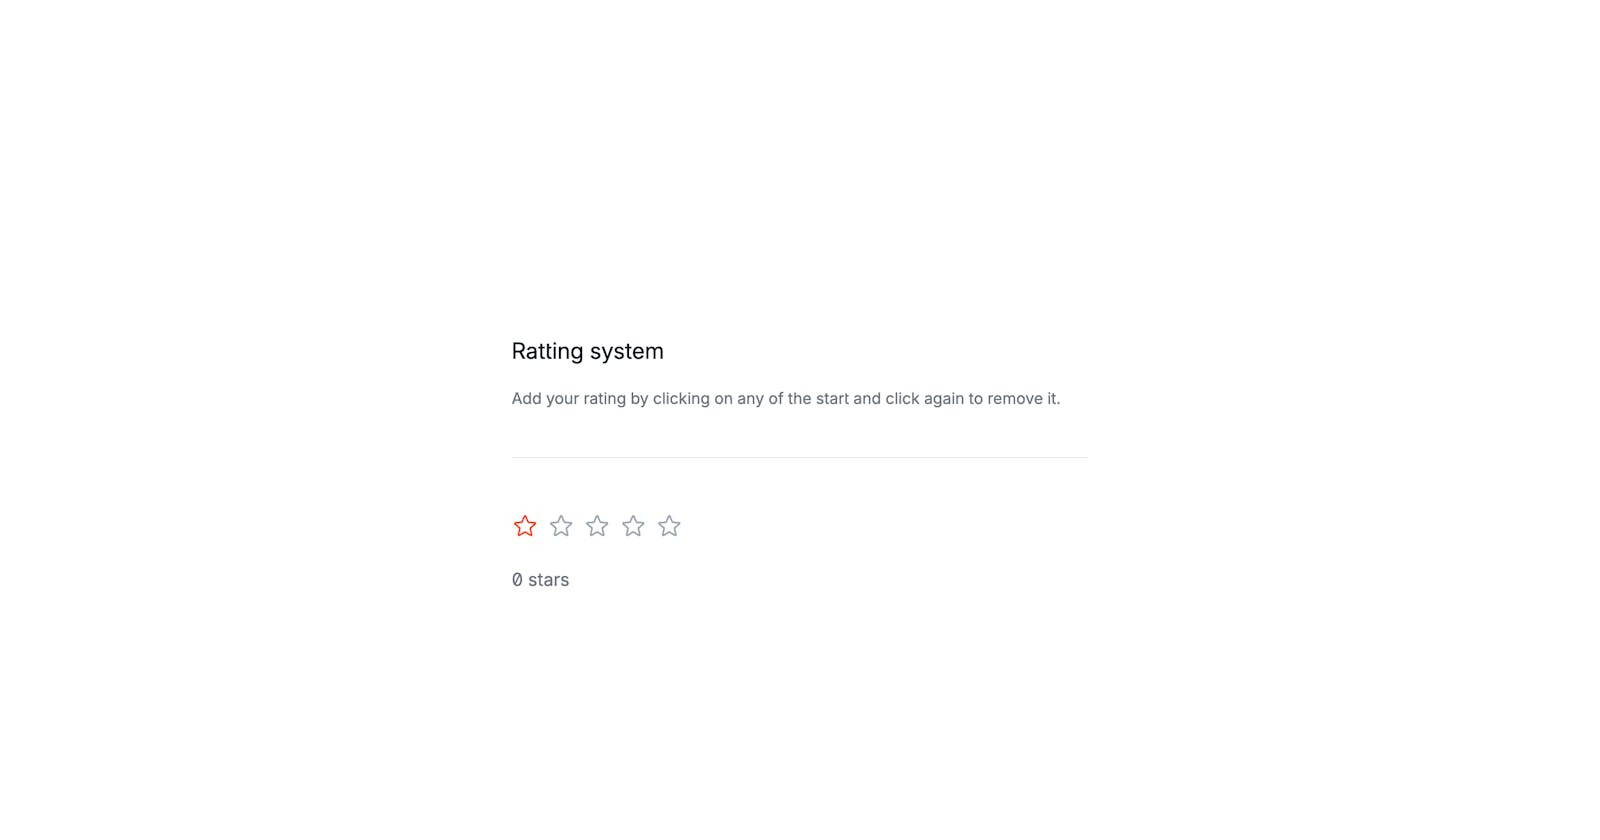 How to create a rating system with Tailwind CSS and Alpinejs